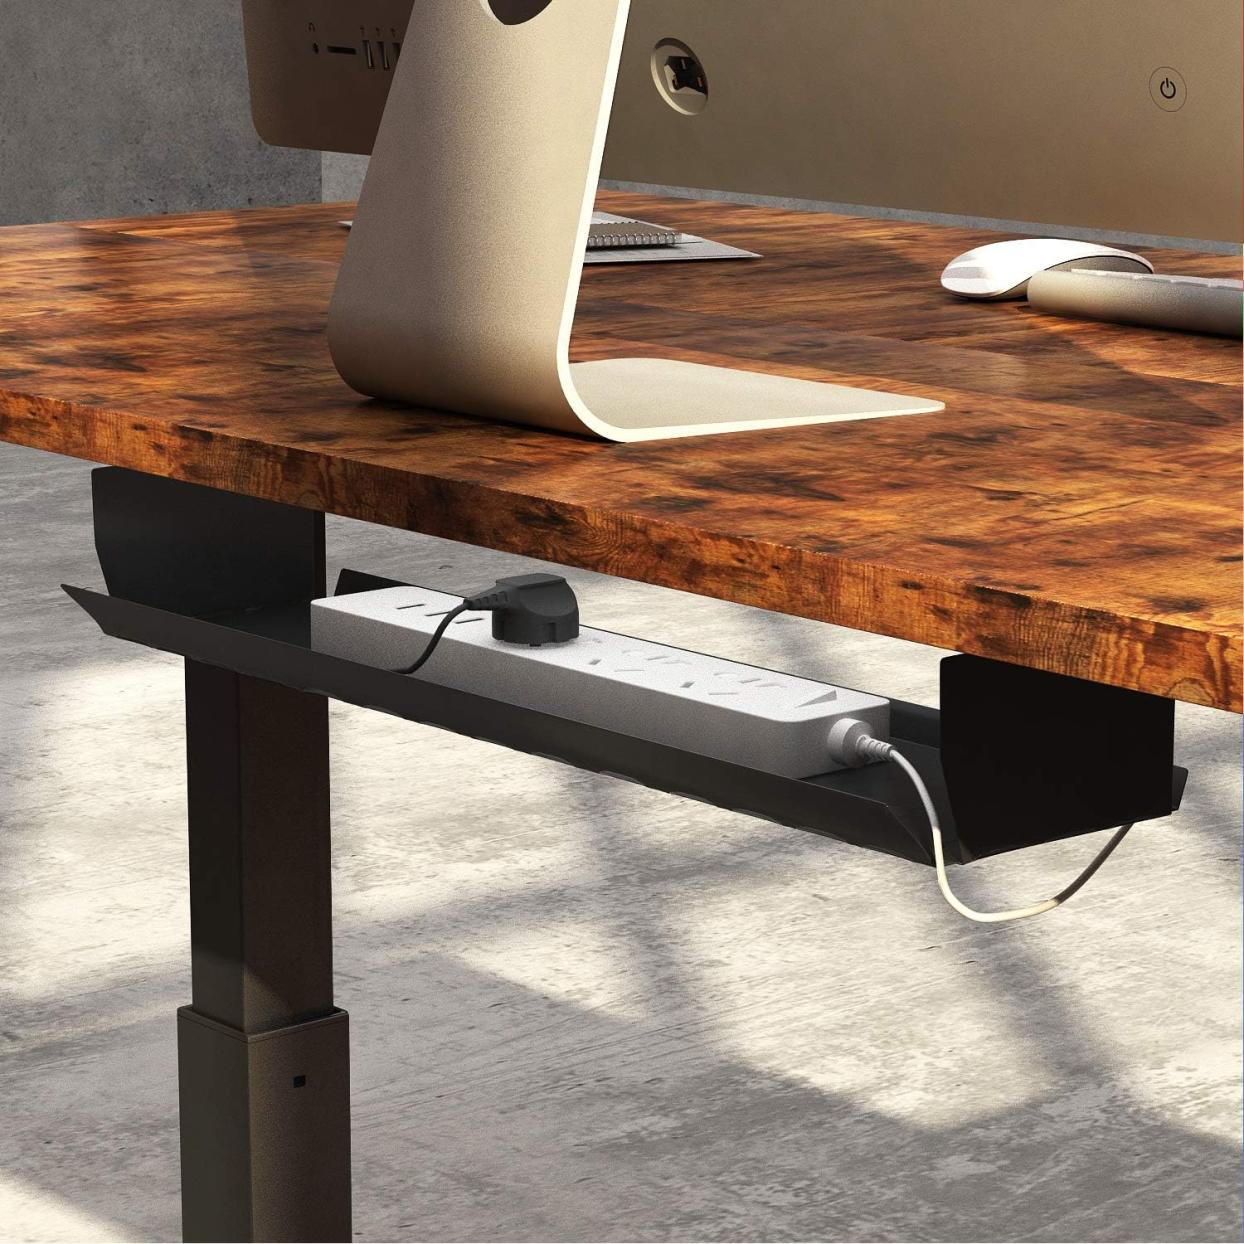 What are the Best Brands of Electric Standing Desks on the Market?